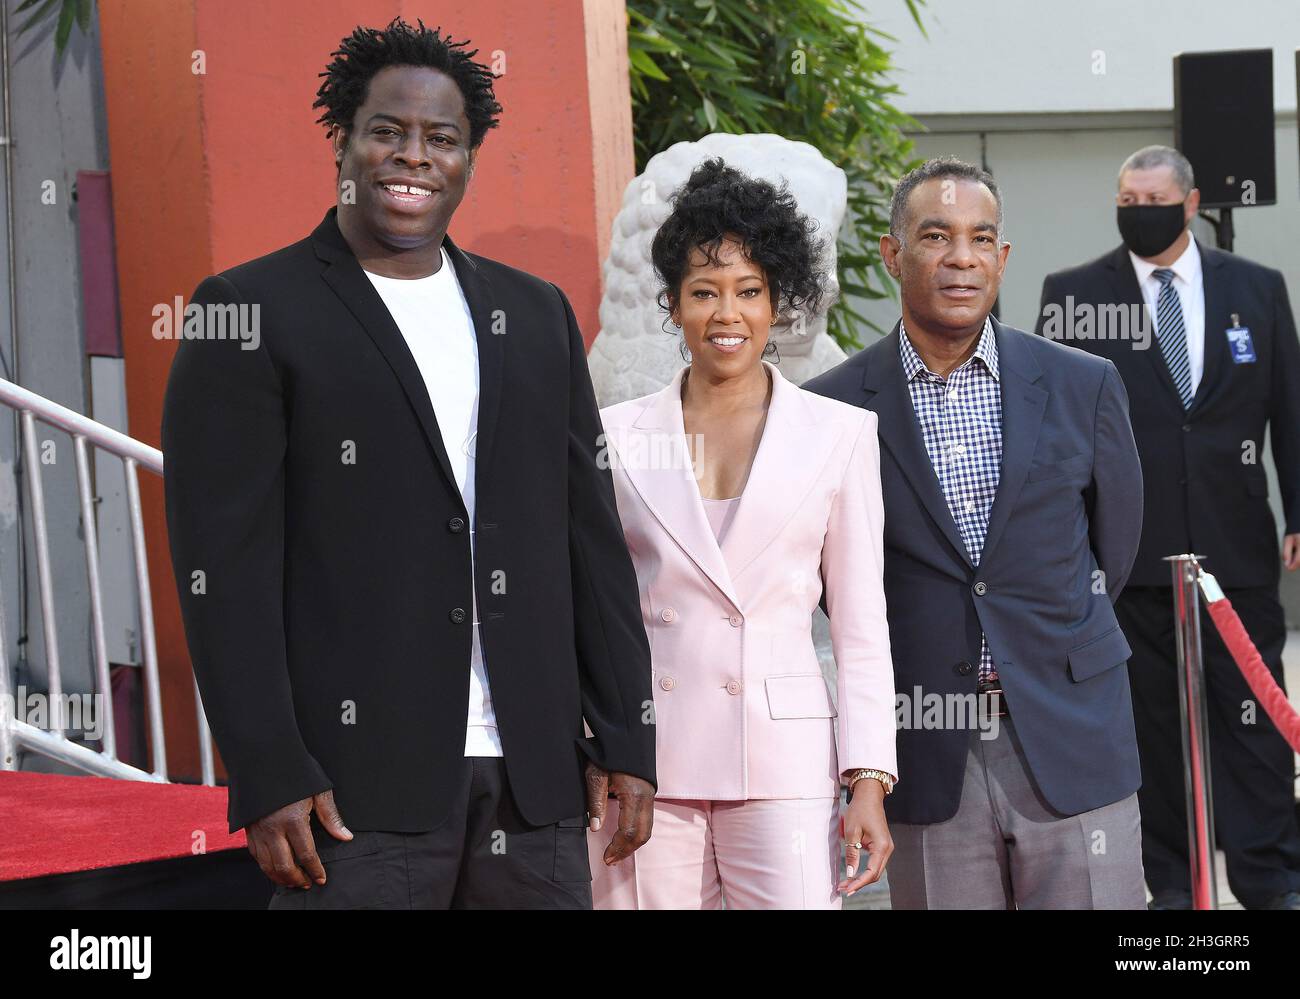 Los Angeles, USA. 28th Oct, 2021. (L-R) Jeymes Samuel, Regina King, and James Lassiter at Regina King's Hand & Footprint Ceremony held at the TCL Chinese Theatre in Hollywood, CA on Thursday, ?October 28, 2021. (Photo By Sthanlee B. Mirador/Sipa USA) Credit: Sipa USA/Alamy Live News Stock Photo